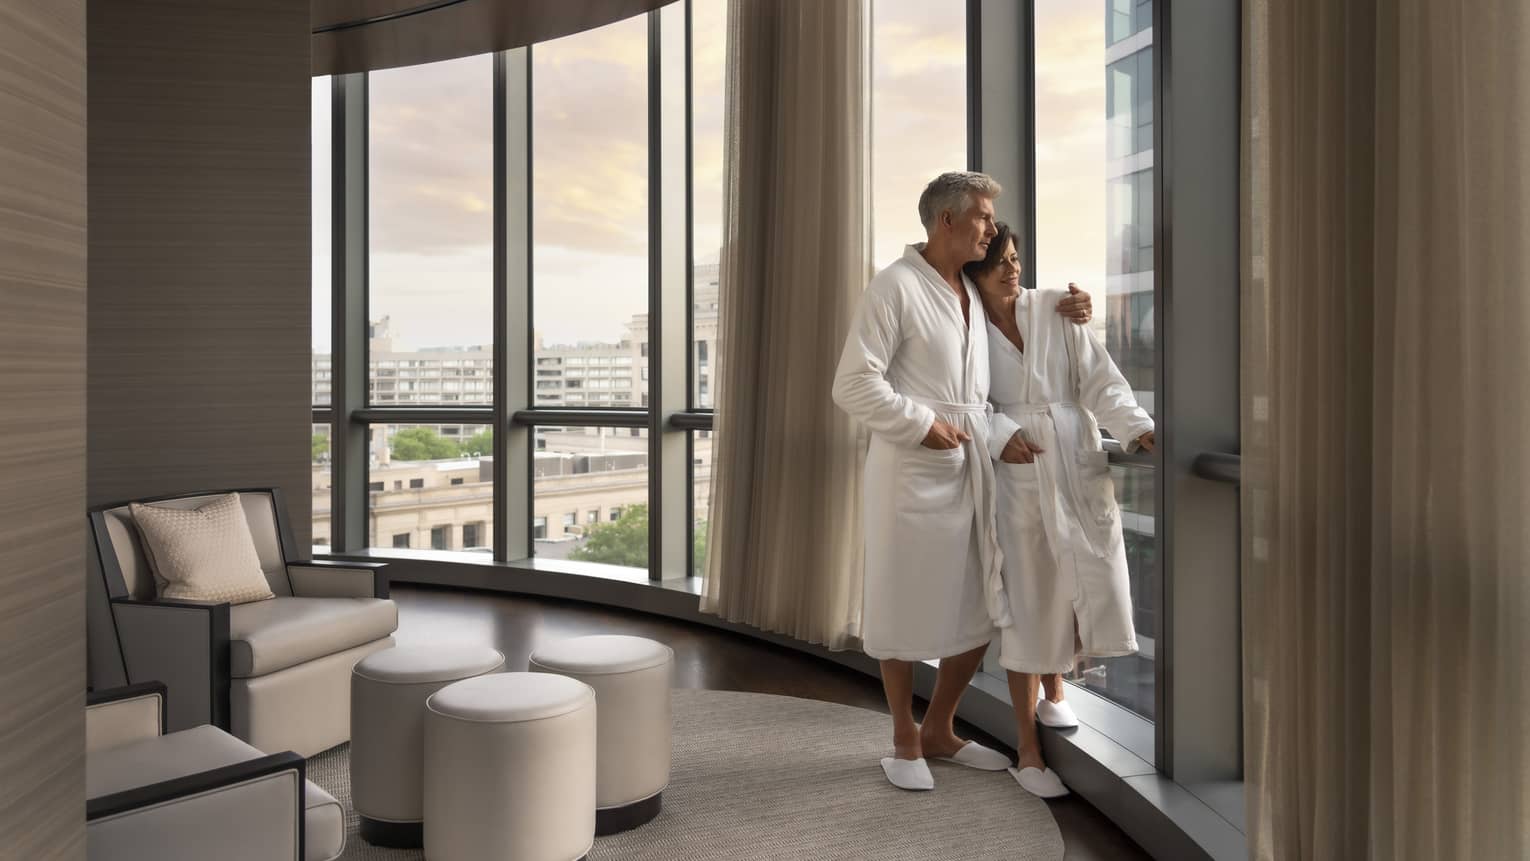 A man and woman in spa robes looking out a window.